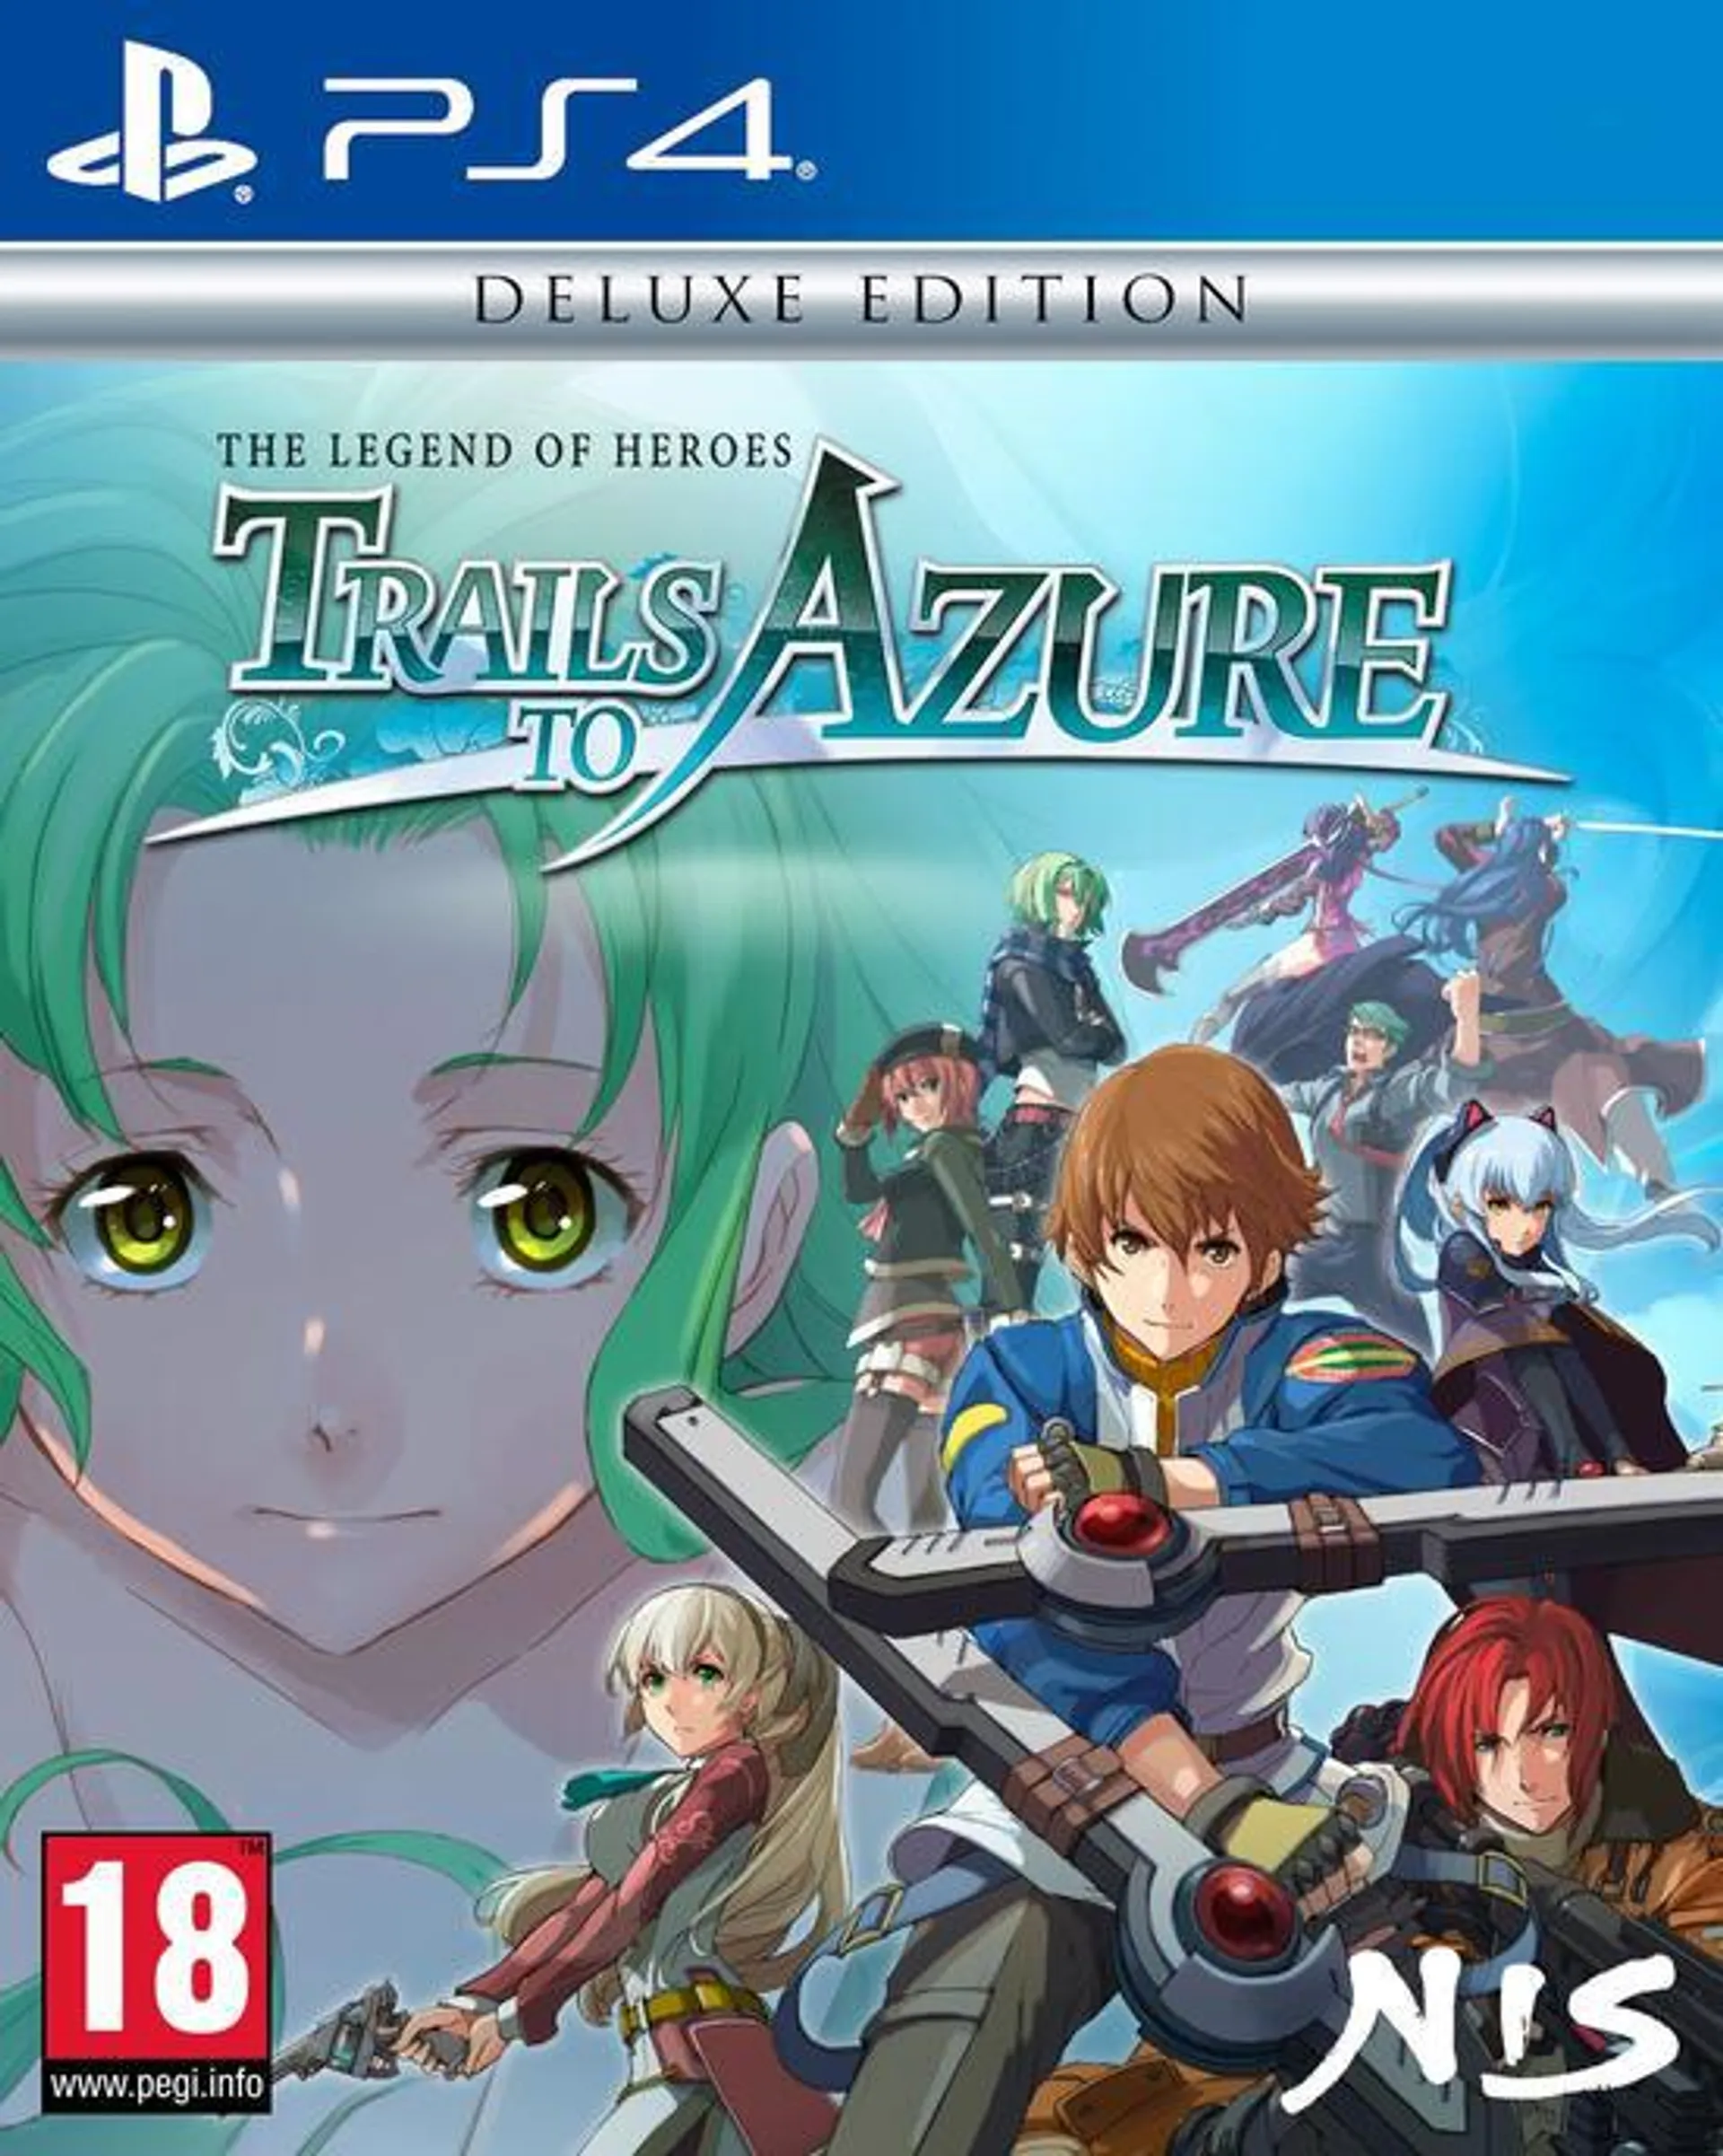 The Legend of Heroes: Trails of Azure